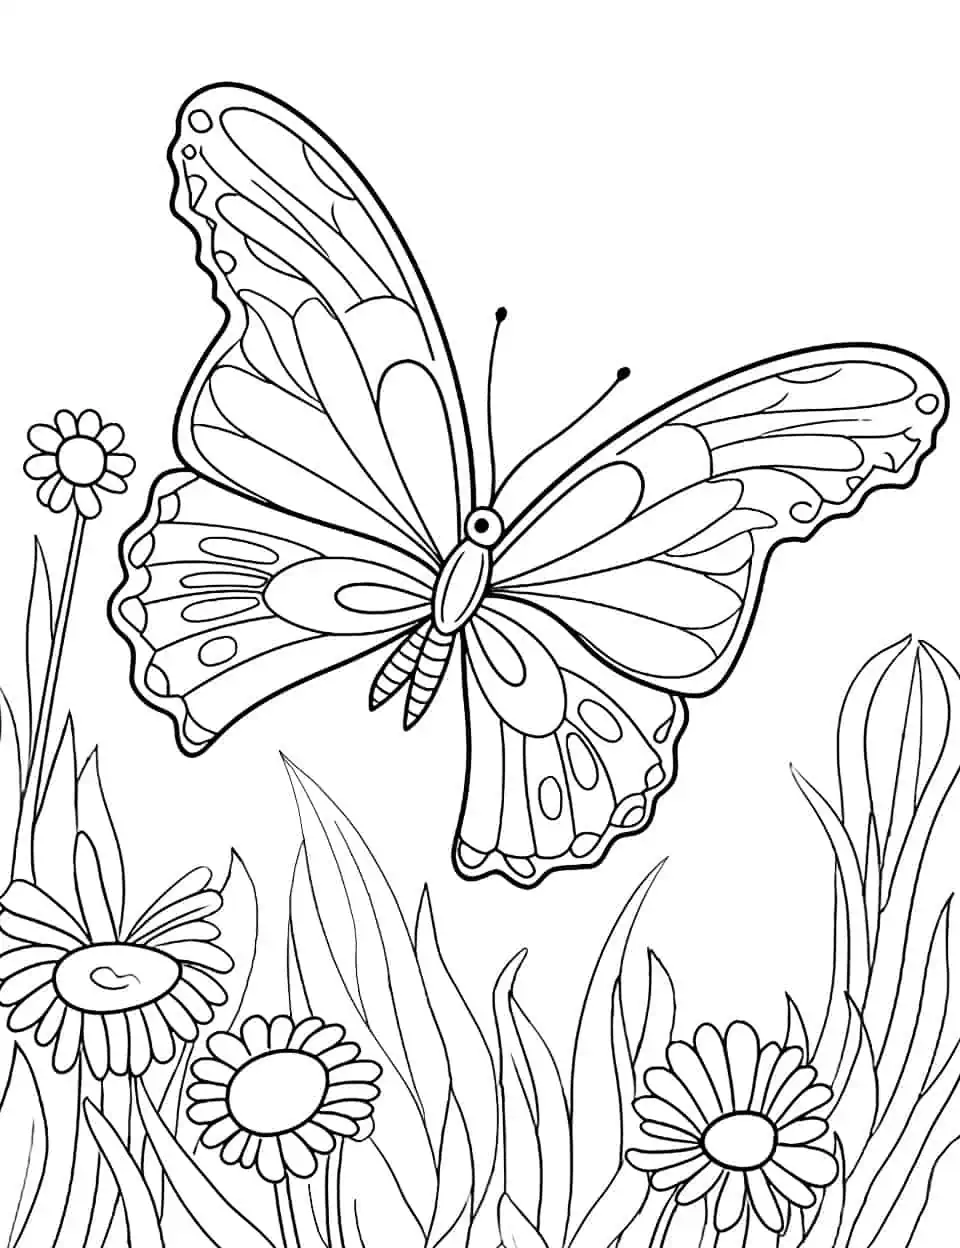 Delightful Discovery Butterfly Coloring Page - A coloring page capturing the joy of discovering a butterfly amidst a field of flowers.